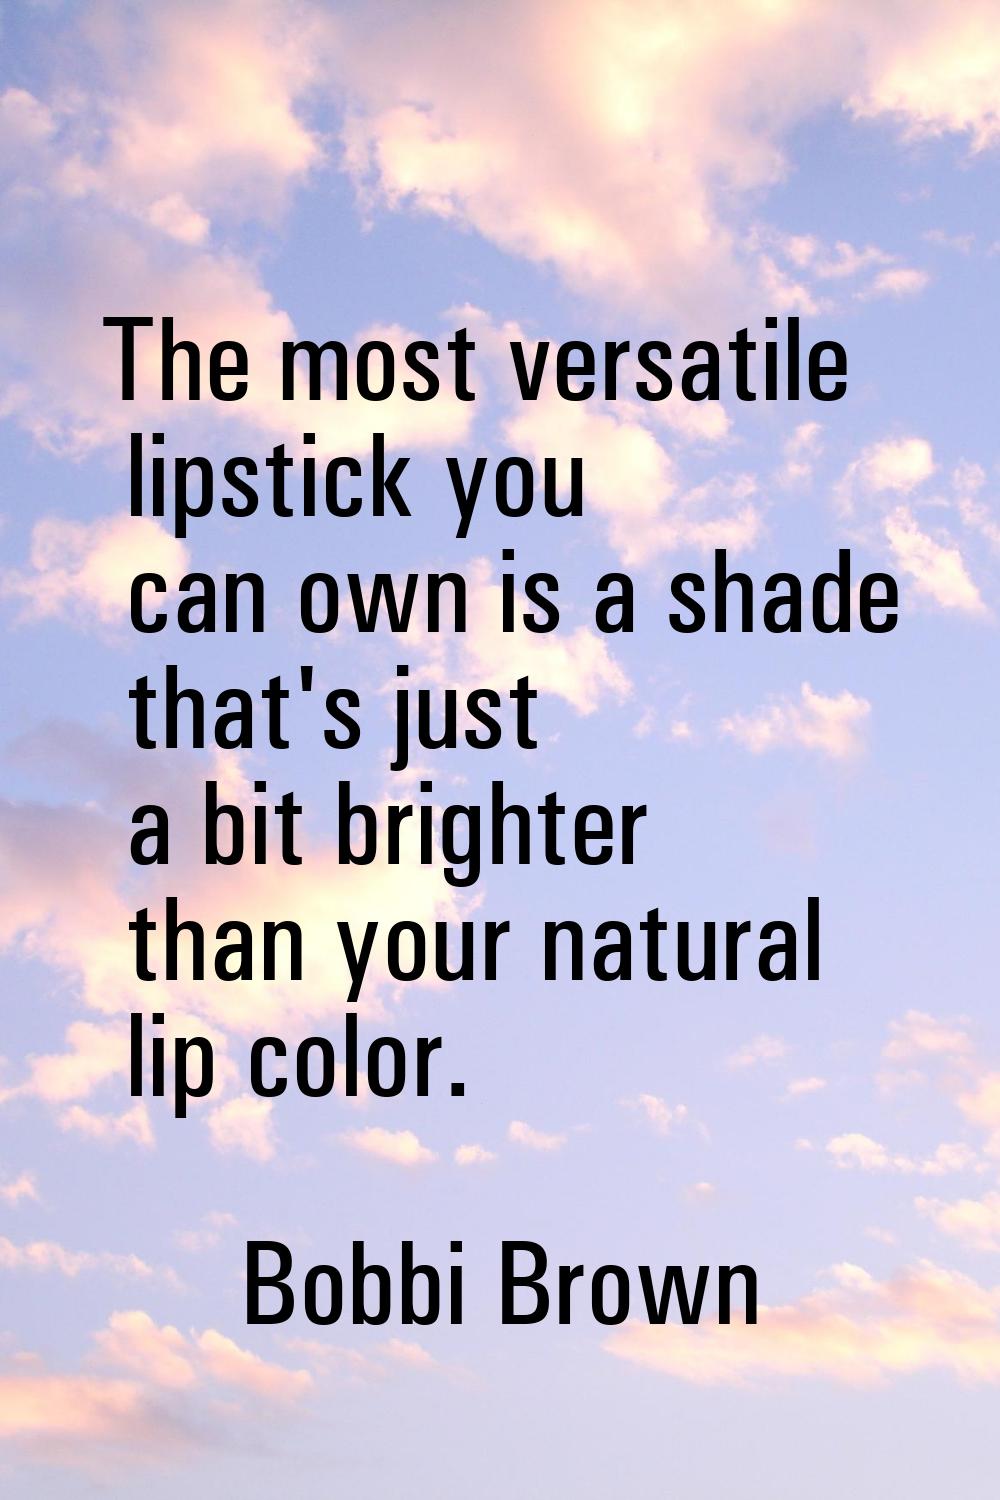 The most versatile lipstick you can own is a shade that's just a bit brighter than your natural lip